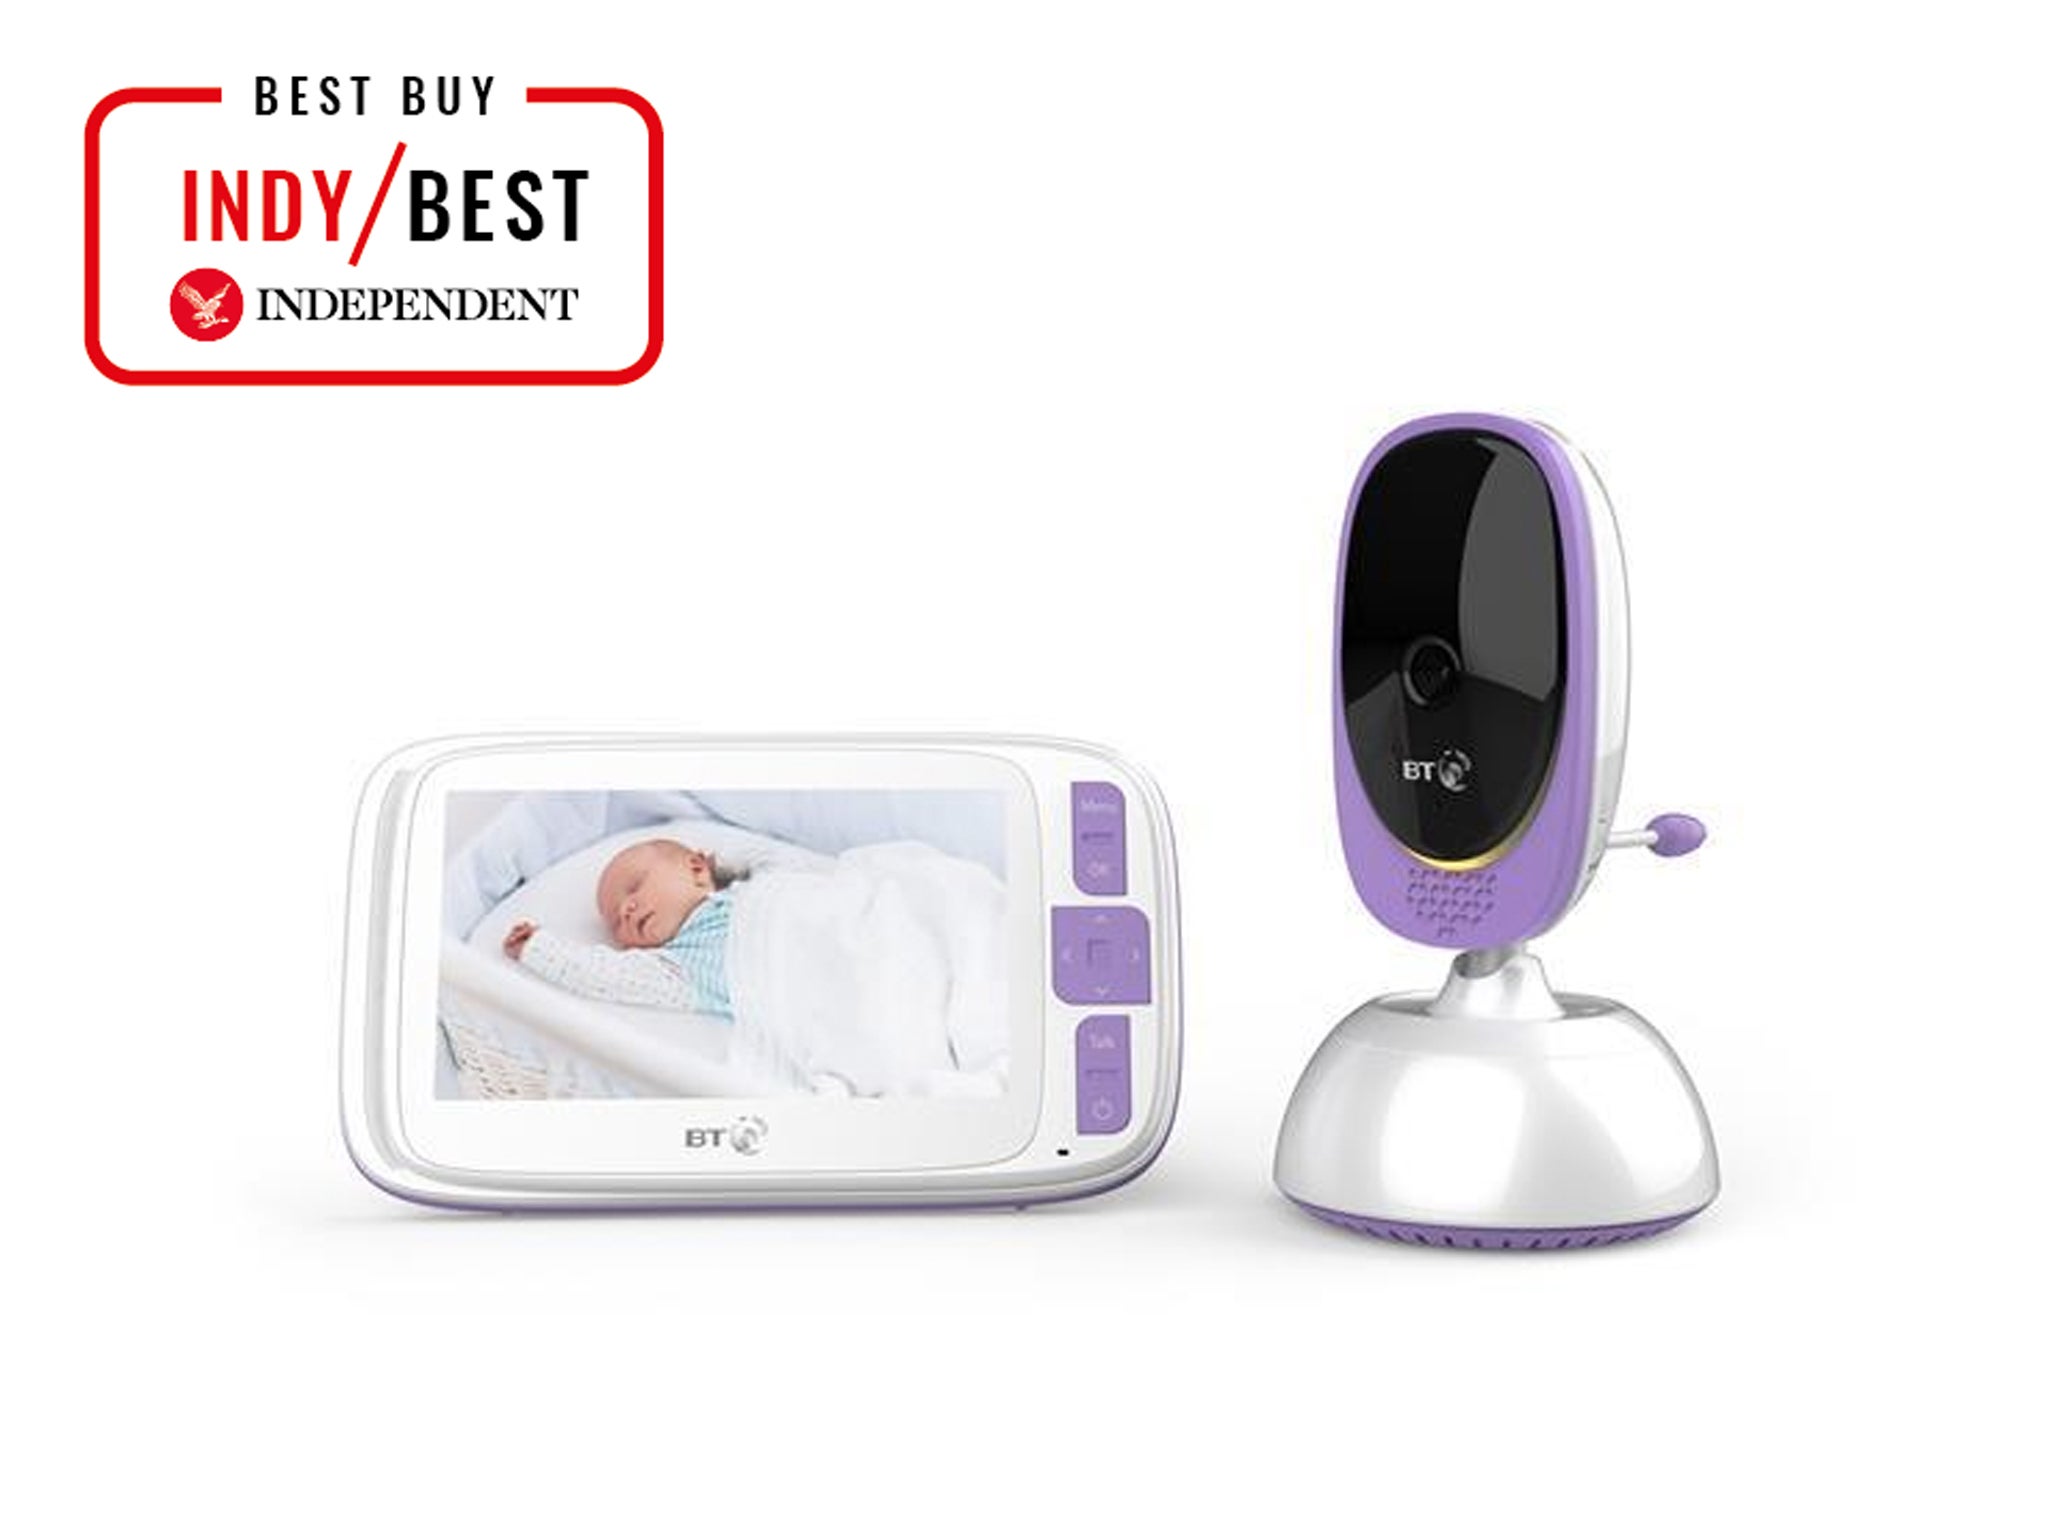 Baby BT Digital Monitor and Pacifier with Lightshow and Lullabies White/ Purple 